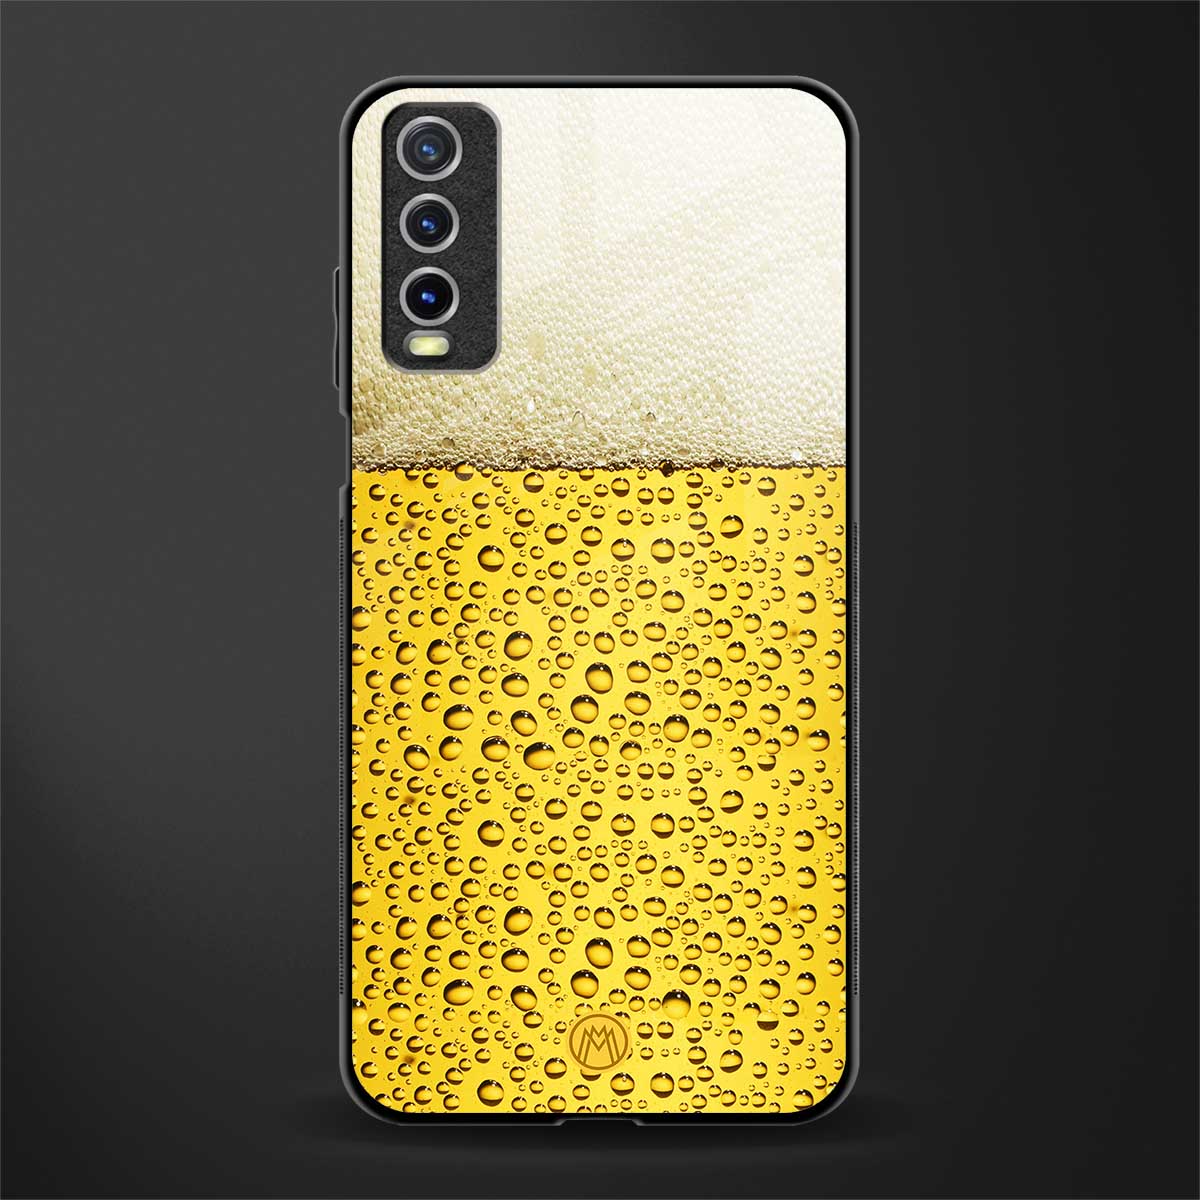 fizzy beer glass case for vivo y20 image